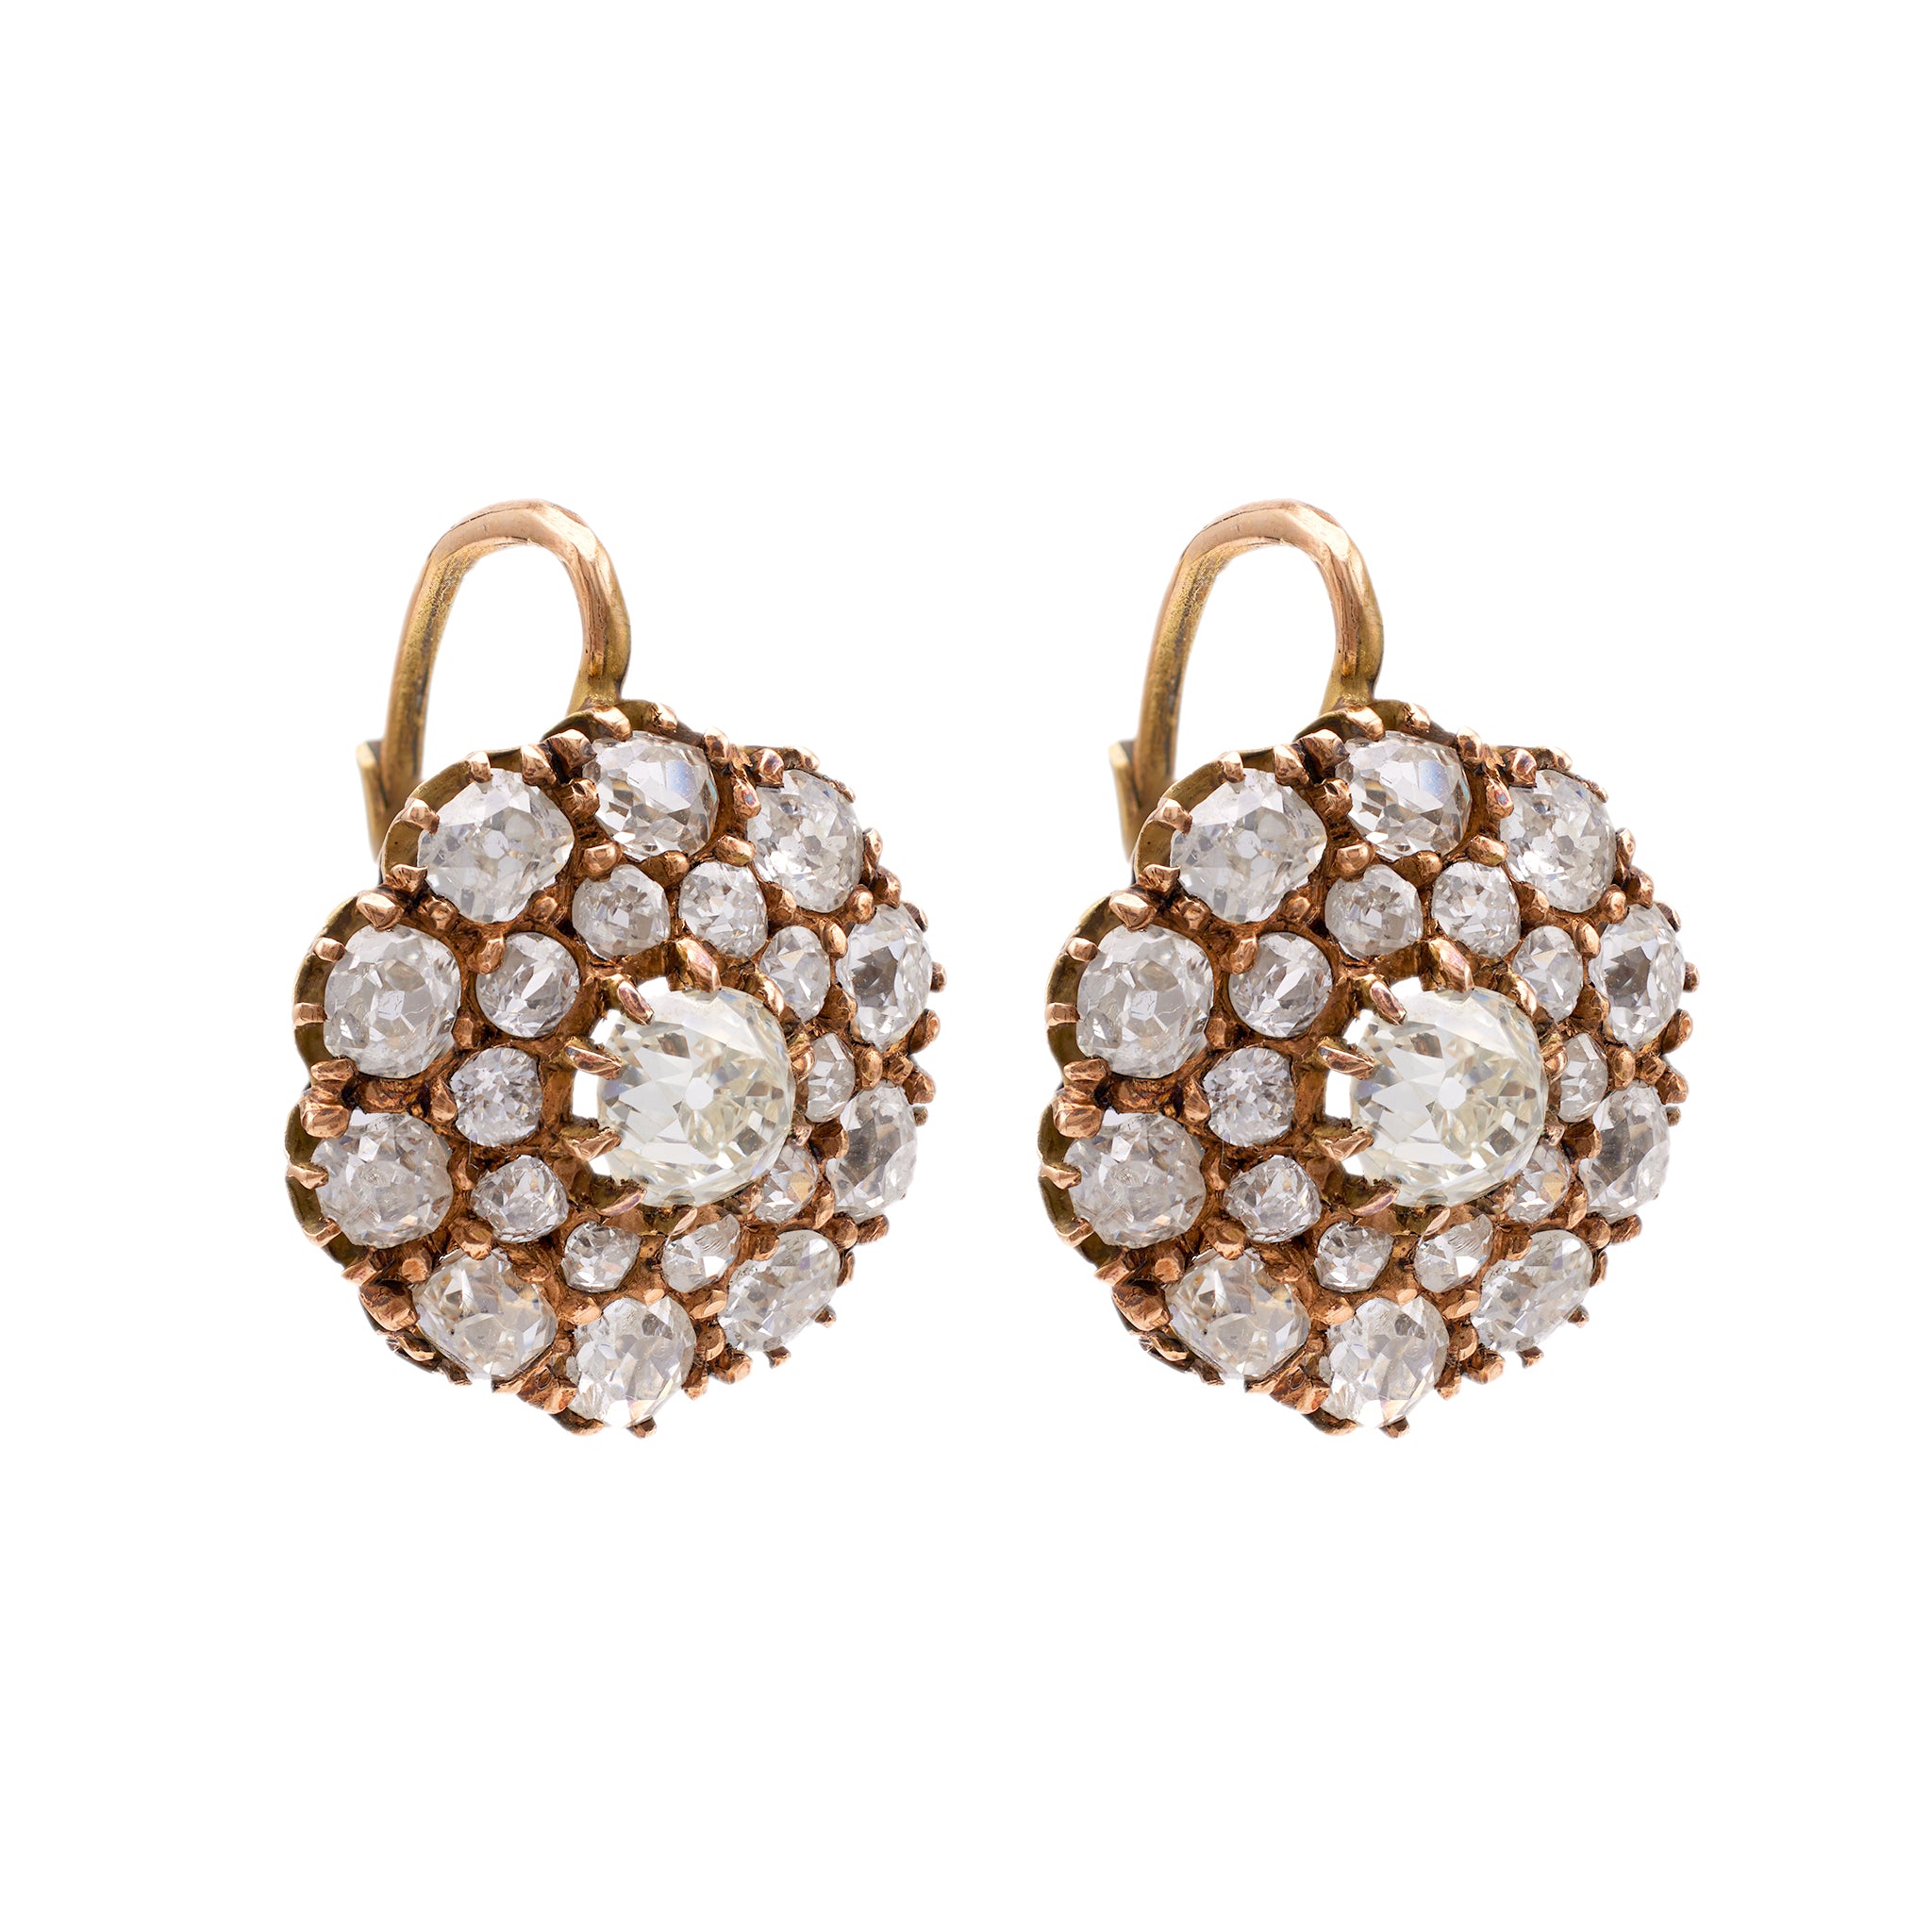 Pair of Antique Inspired 4.47 Carat Total Weight Diamond 18k Yellow Gold Cluster Earrings Earrings Jack Weir & Sons   